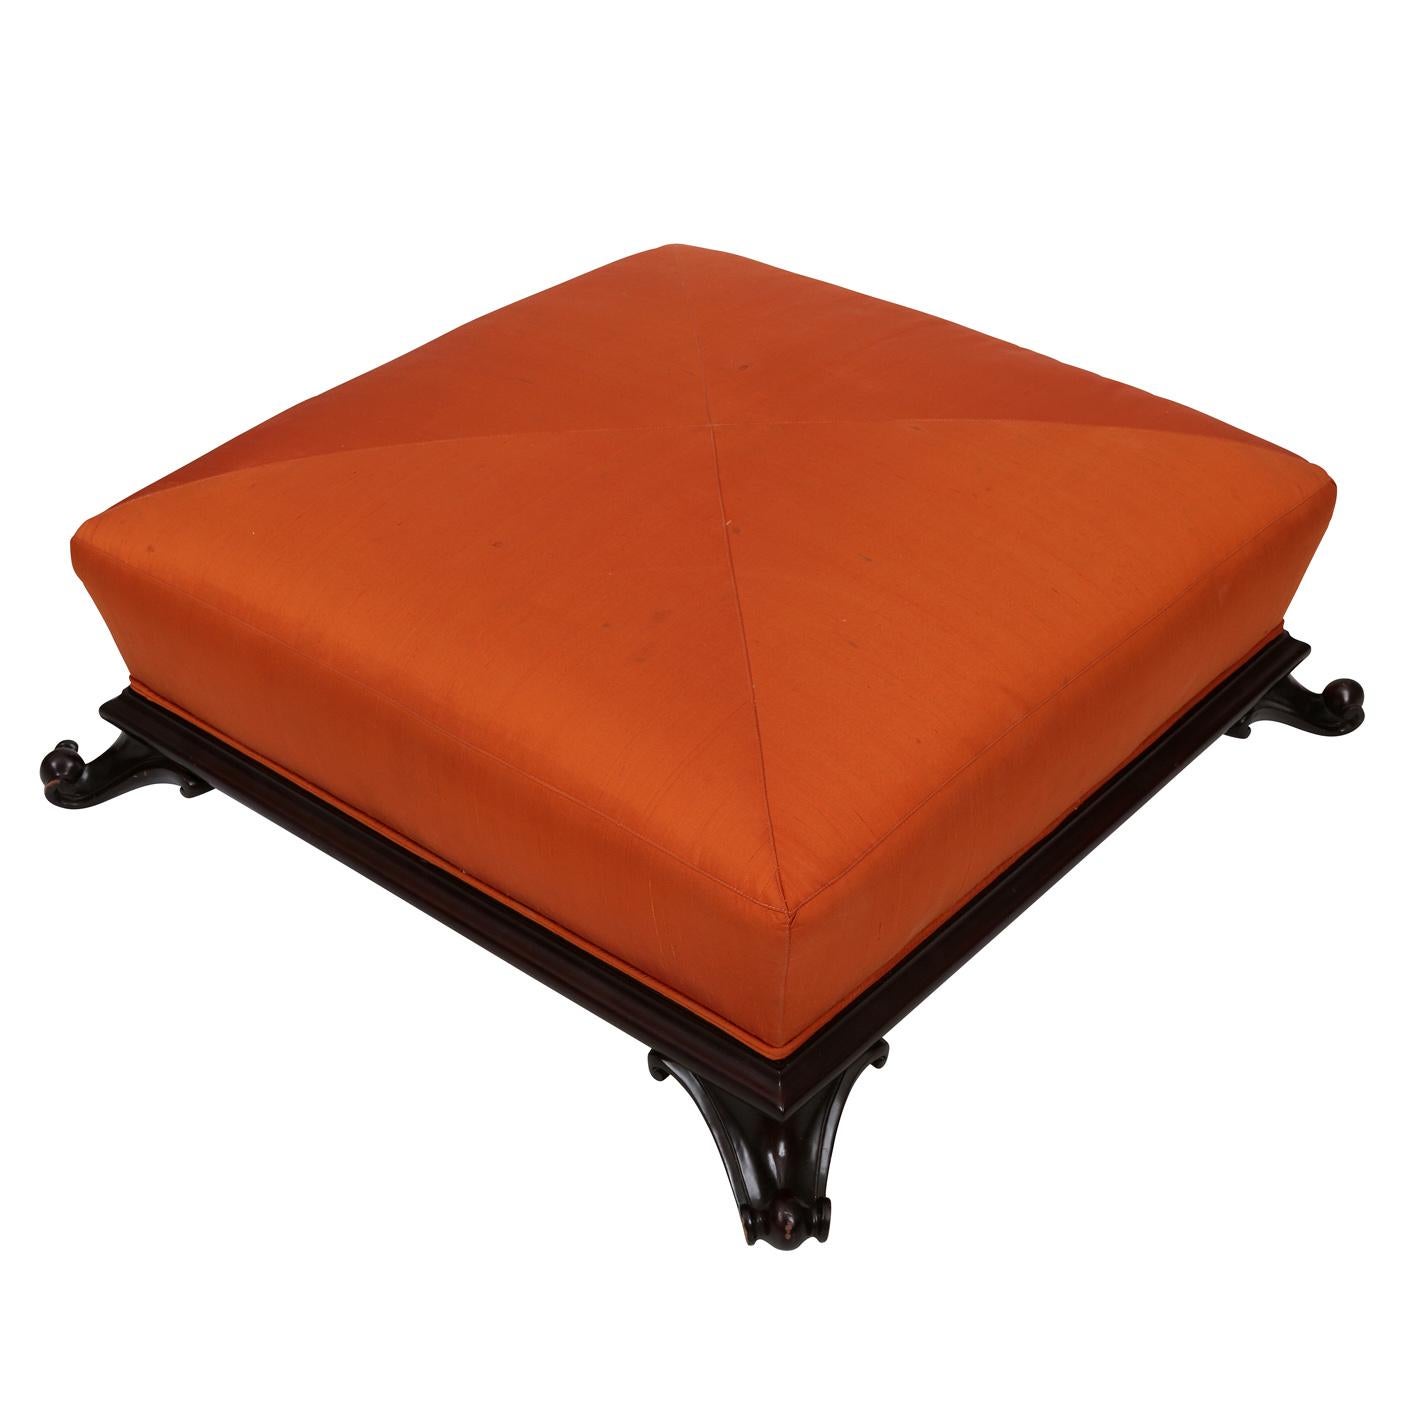 A super chic vintage Frances Elkins footed Turkish ottoman with a gorgeous orange silk upholstery top.